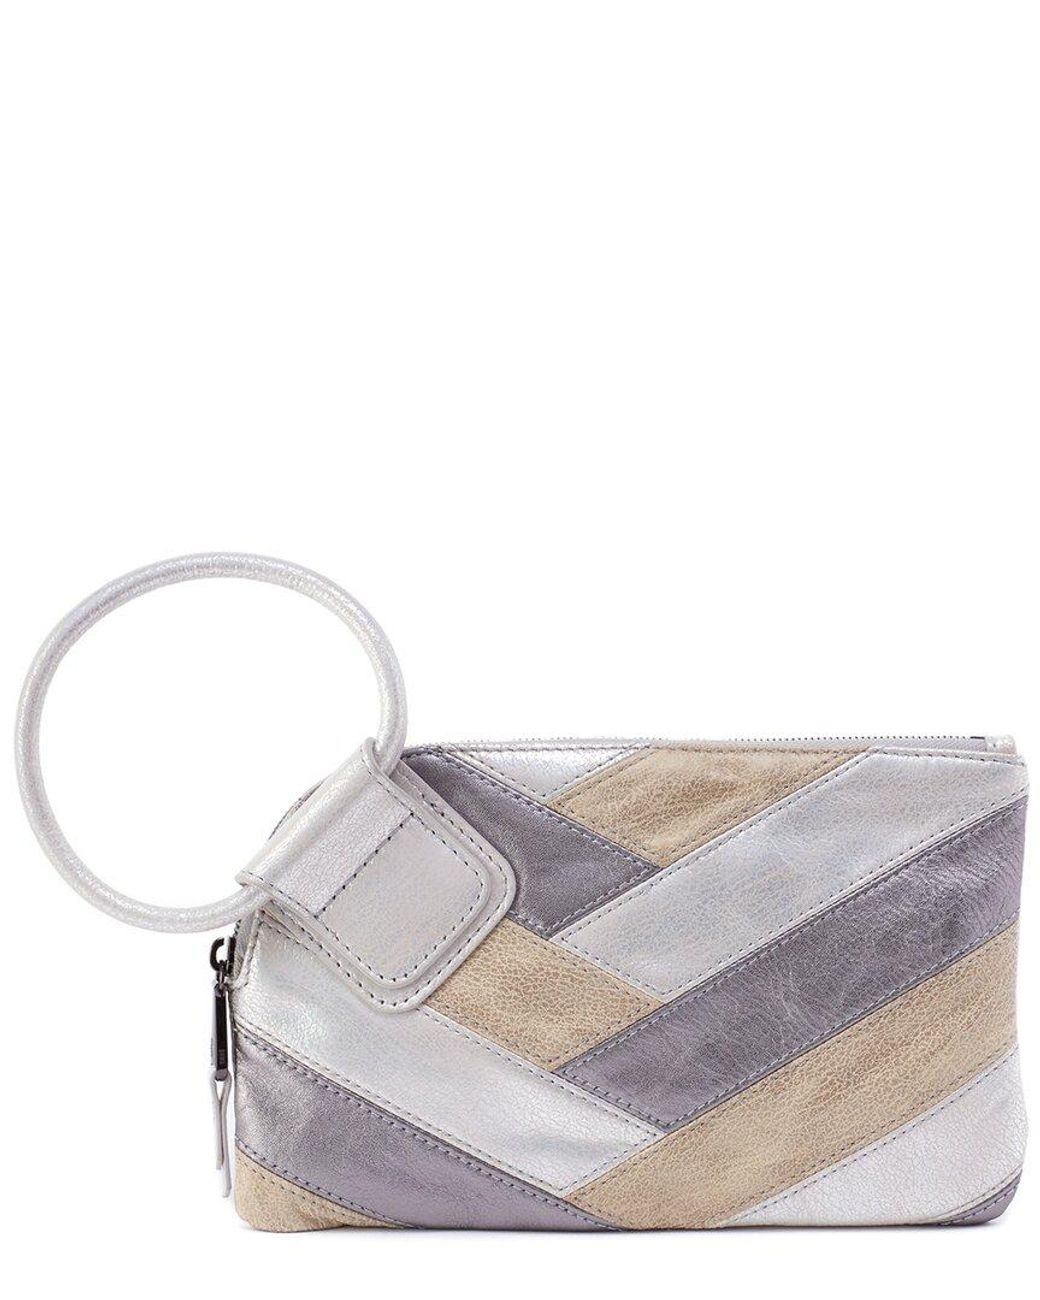 Hobo International Sable Leather Wristlet in Grey | Lyst Canada